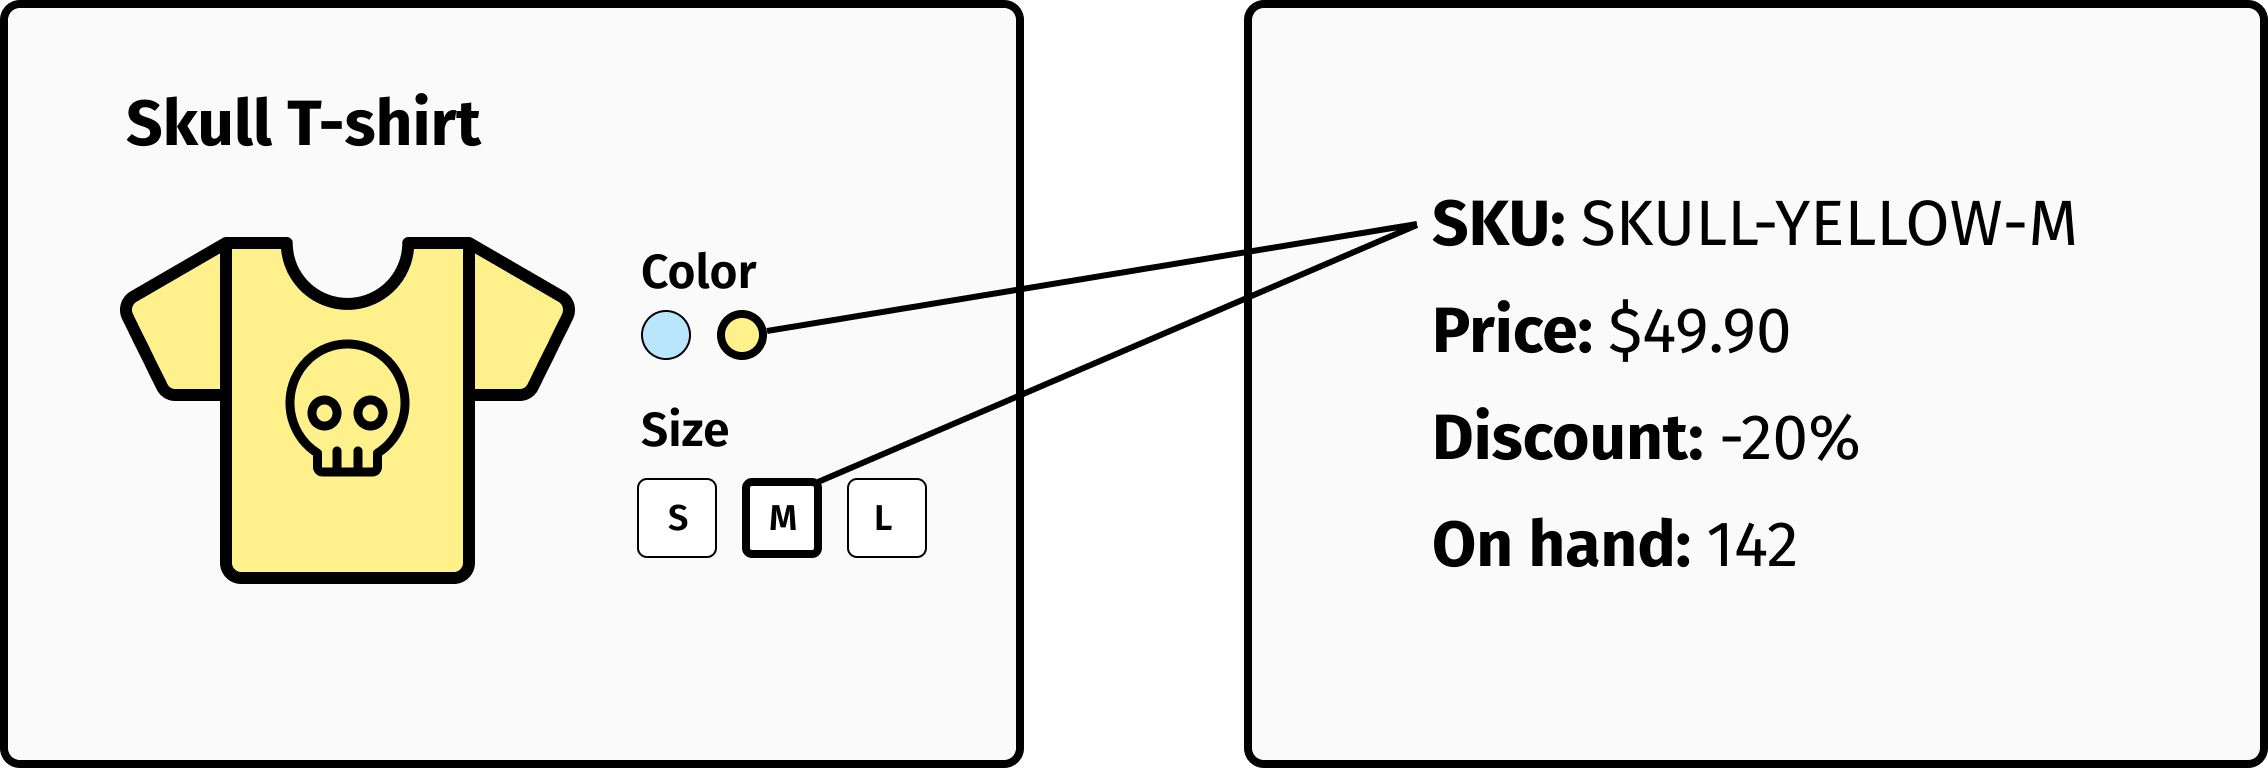 The SKU code connects the content layer to the commerce layer.